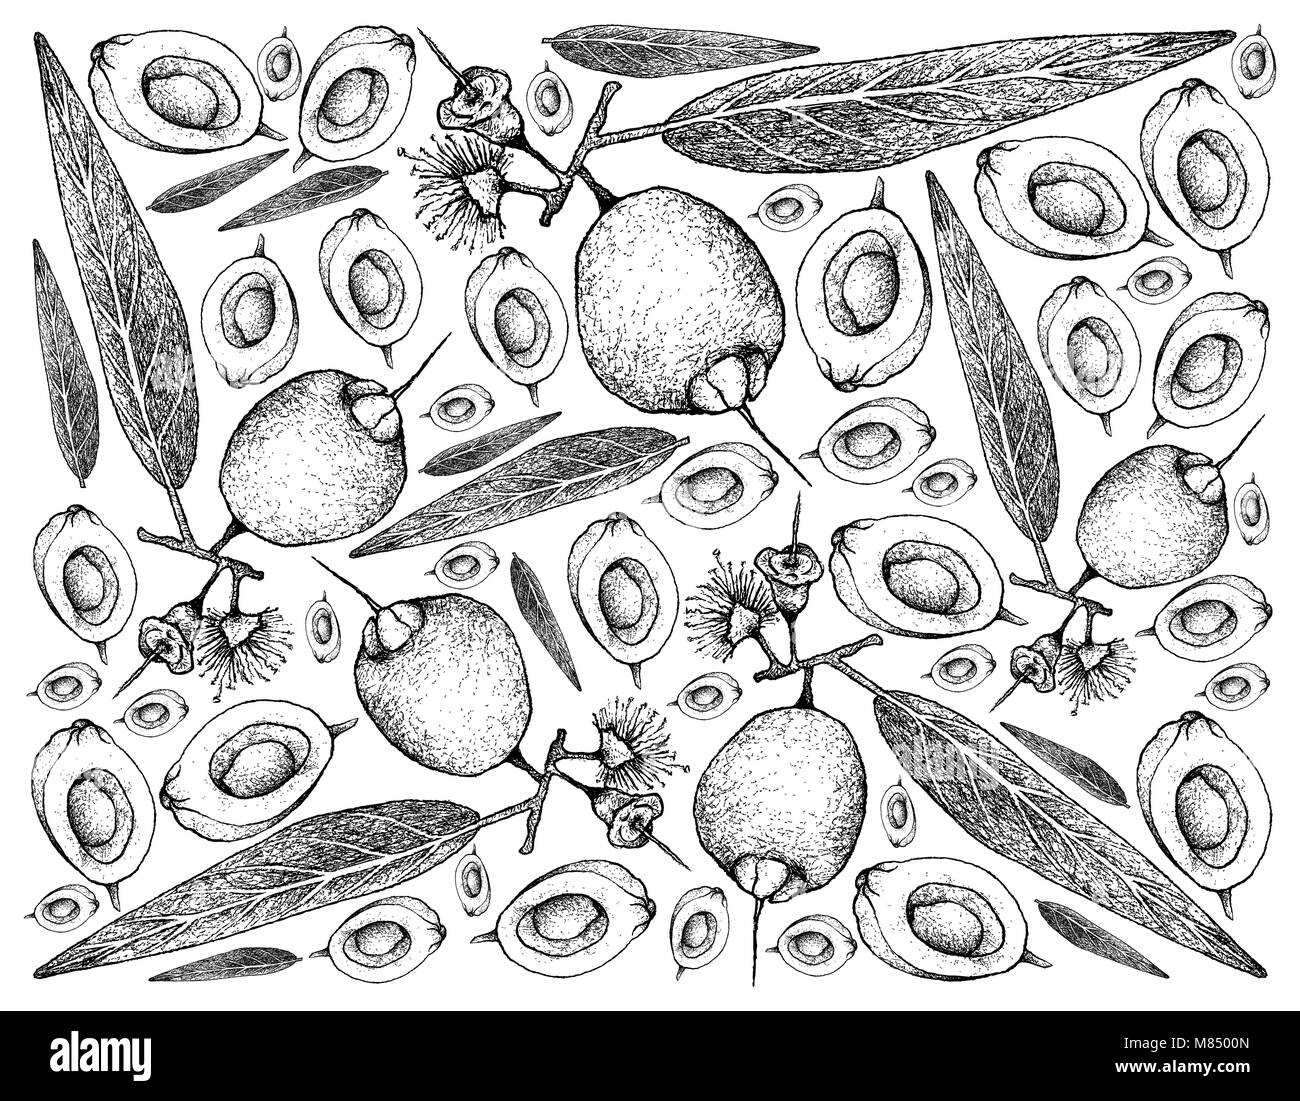 Tropical Fruits, Illustration Wallpaper Background Hand Drawn Sketch of Mountain Apple, Malabar Plum, Water Rose Apple or Syzygium Jambos Fruits Isola Stock Photo